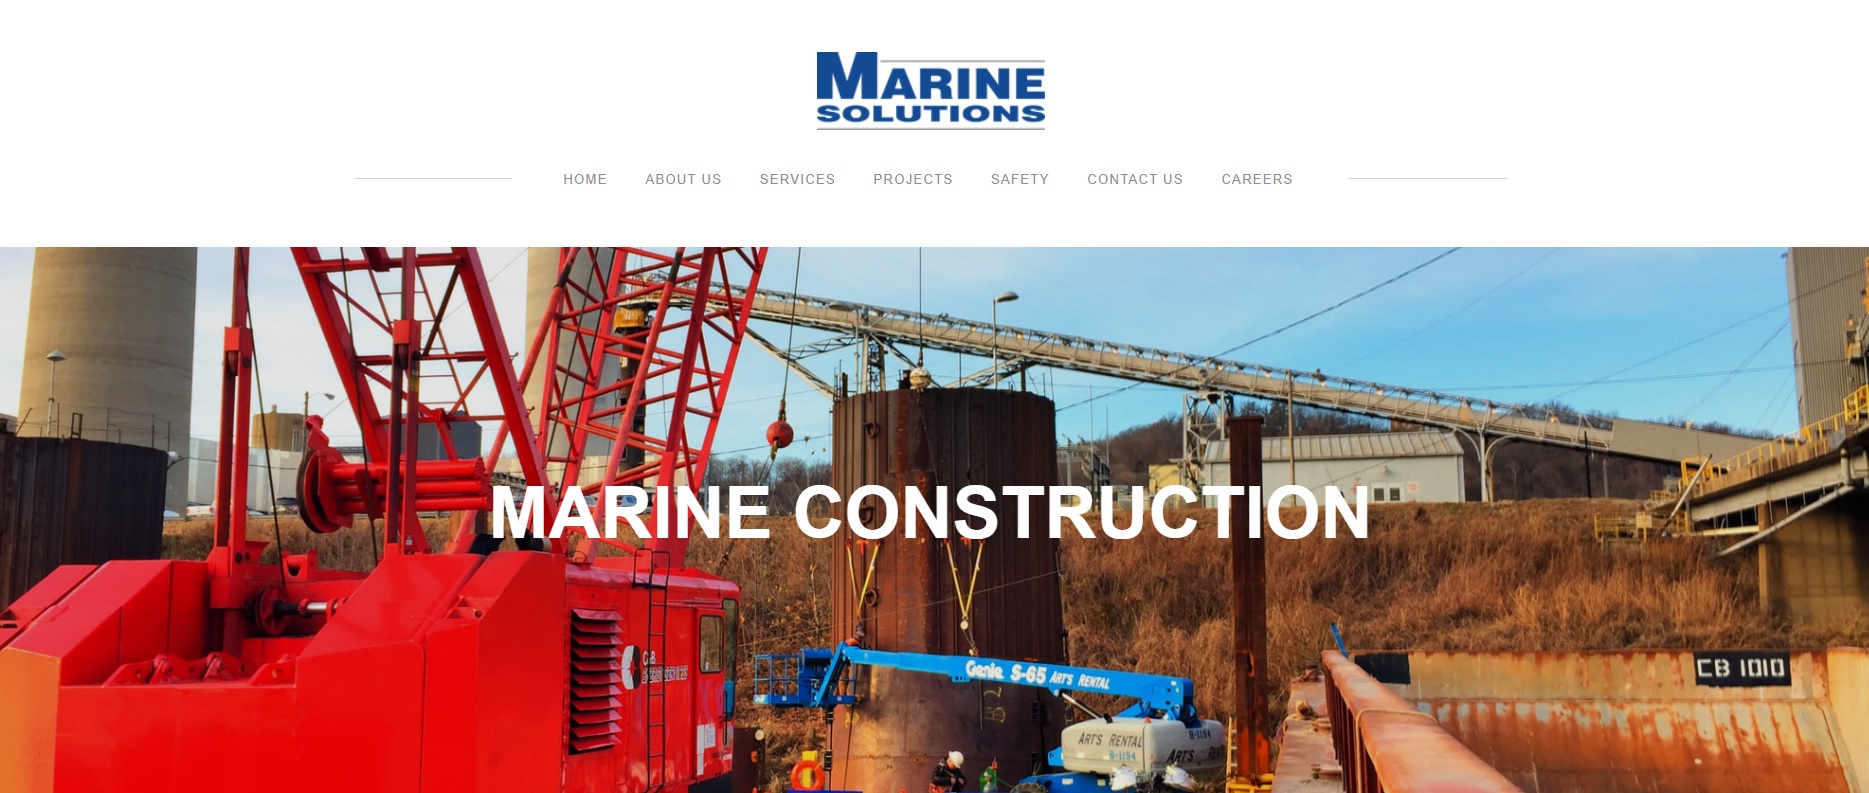 Marine solutions Group - ADA compliant website example